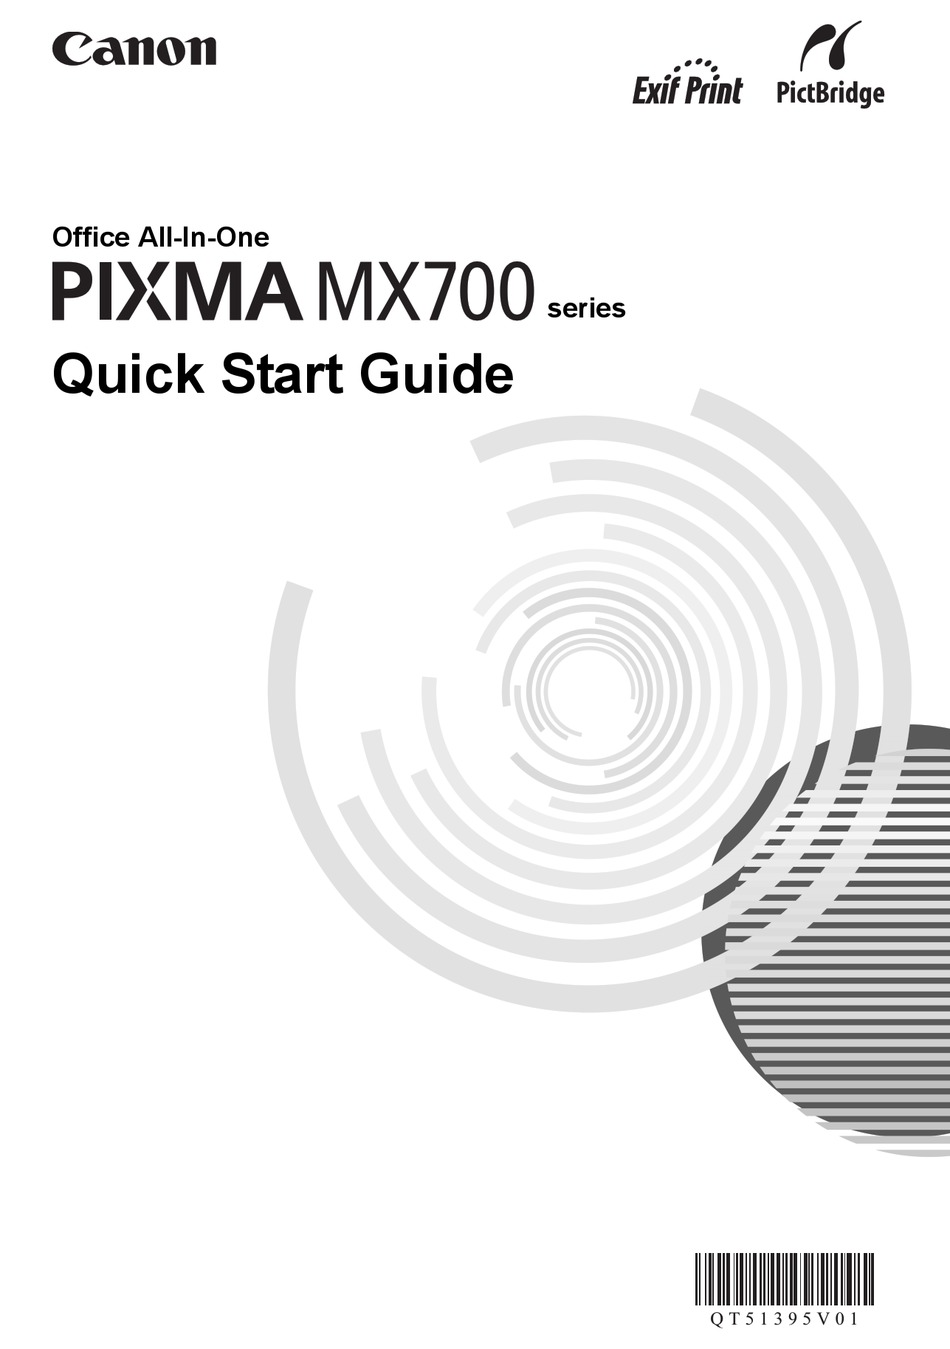 Canon Mx700 Treiber Windows 10 : Pixma Mx700 Support Download Drivers Software And Manuals Canon ...